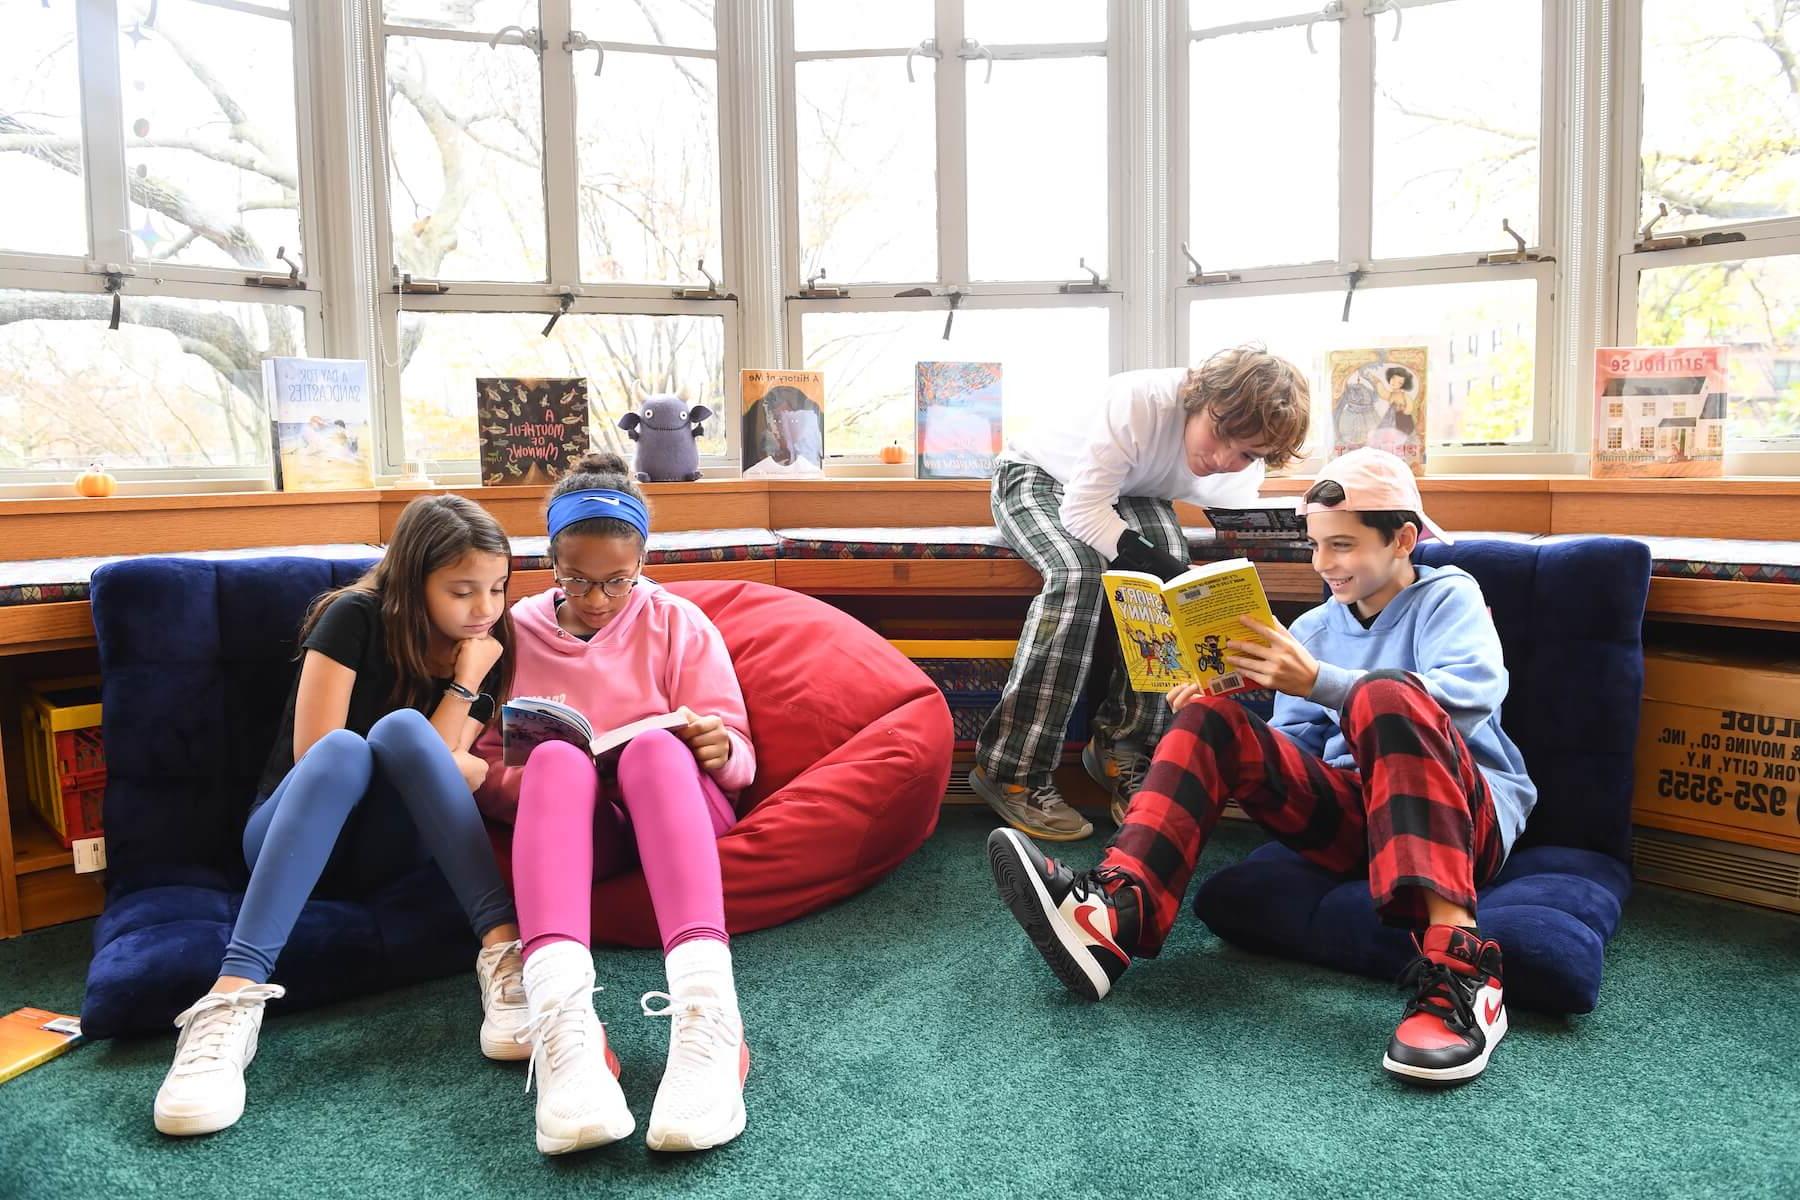 Ethical Culture Fieldston School 5th graders share books in the library